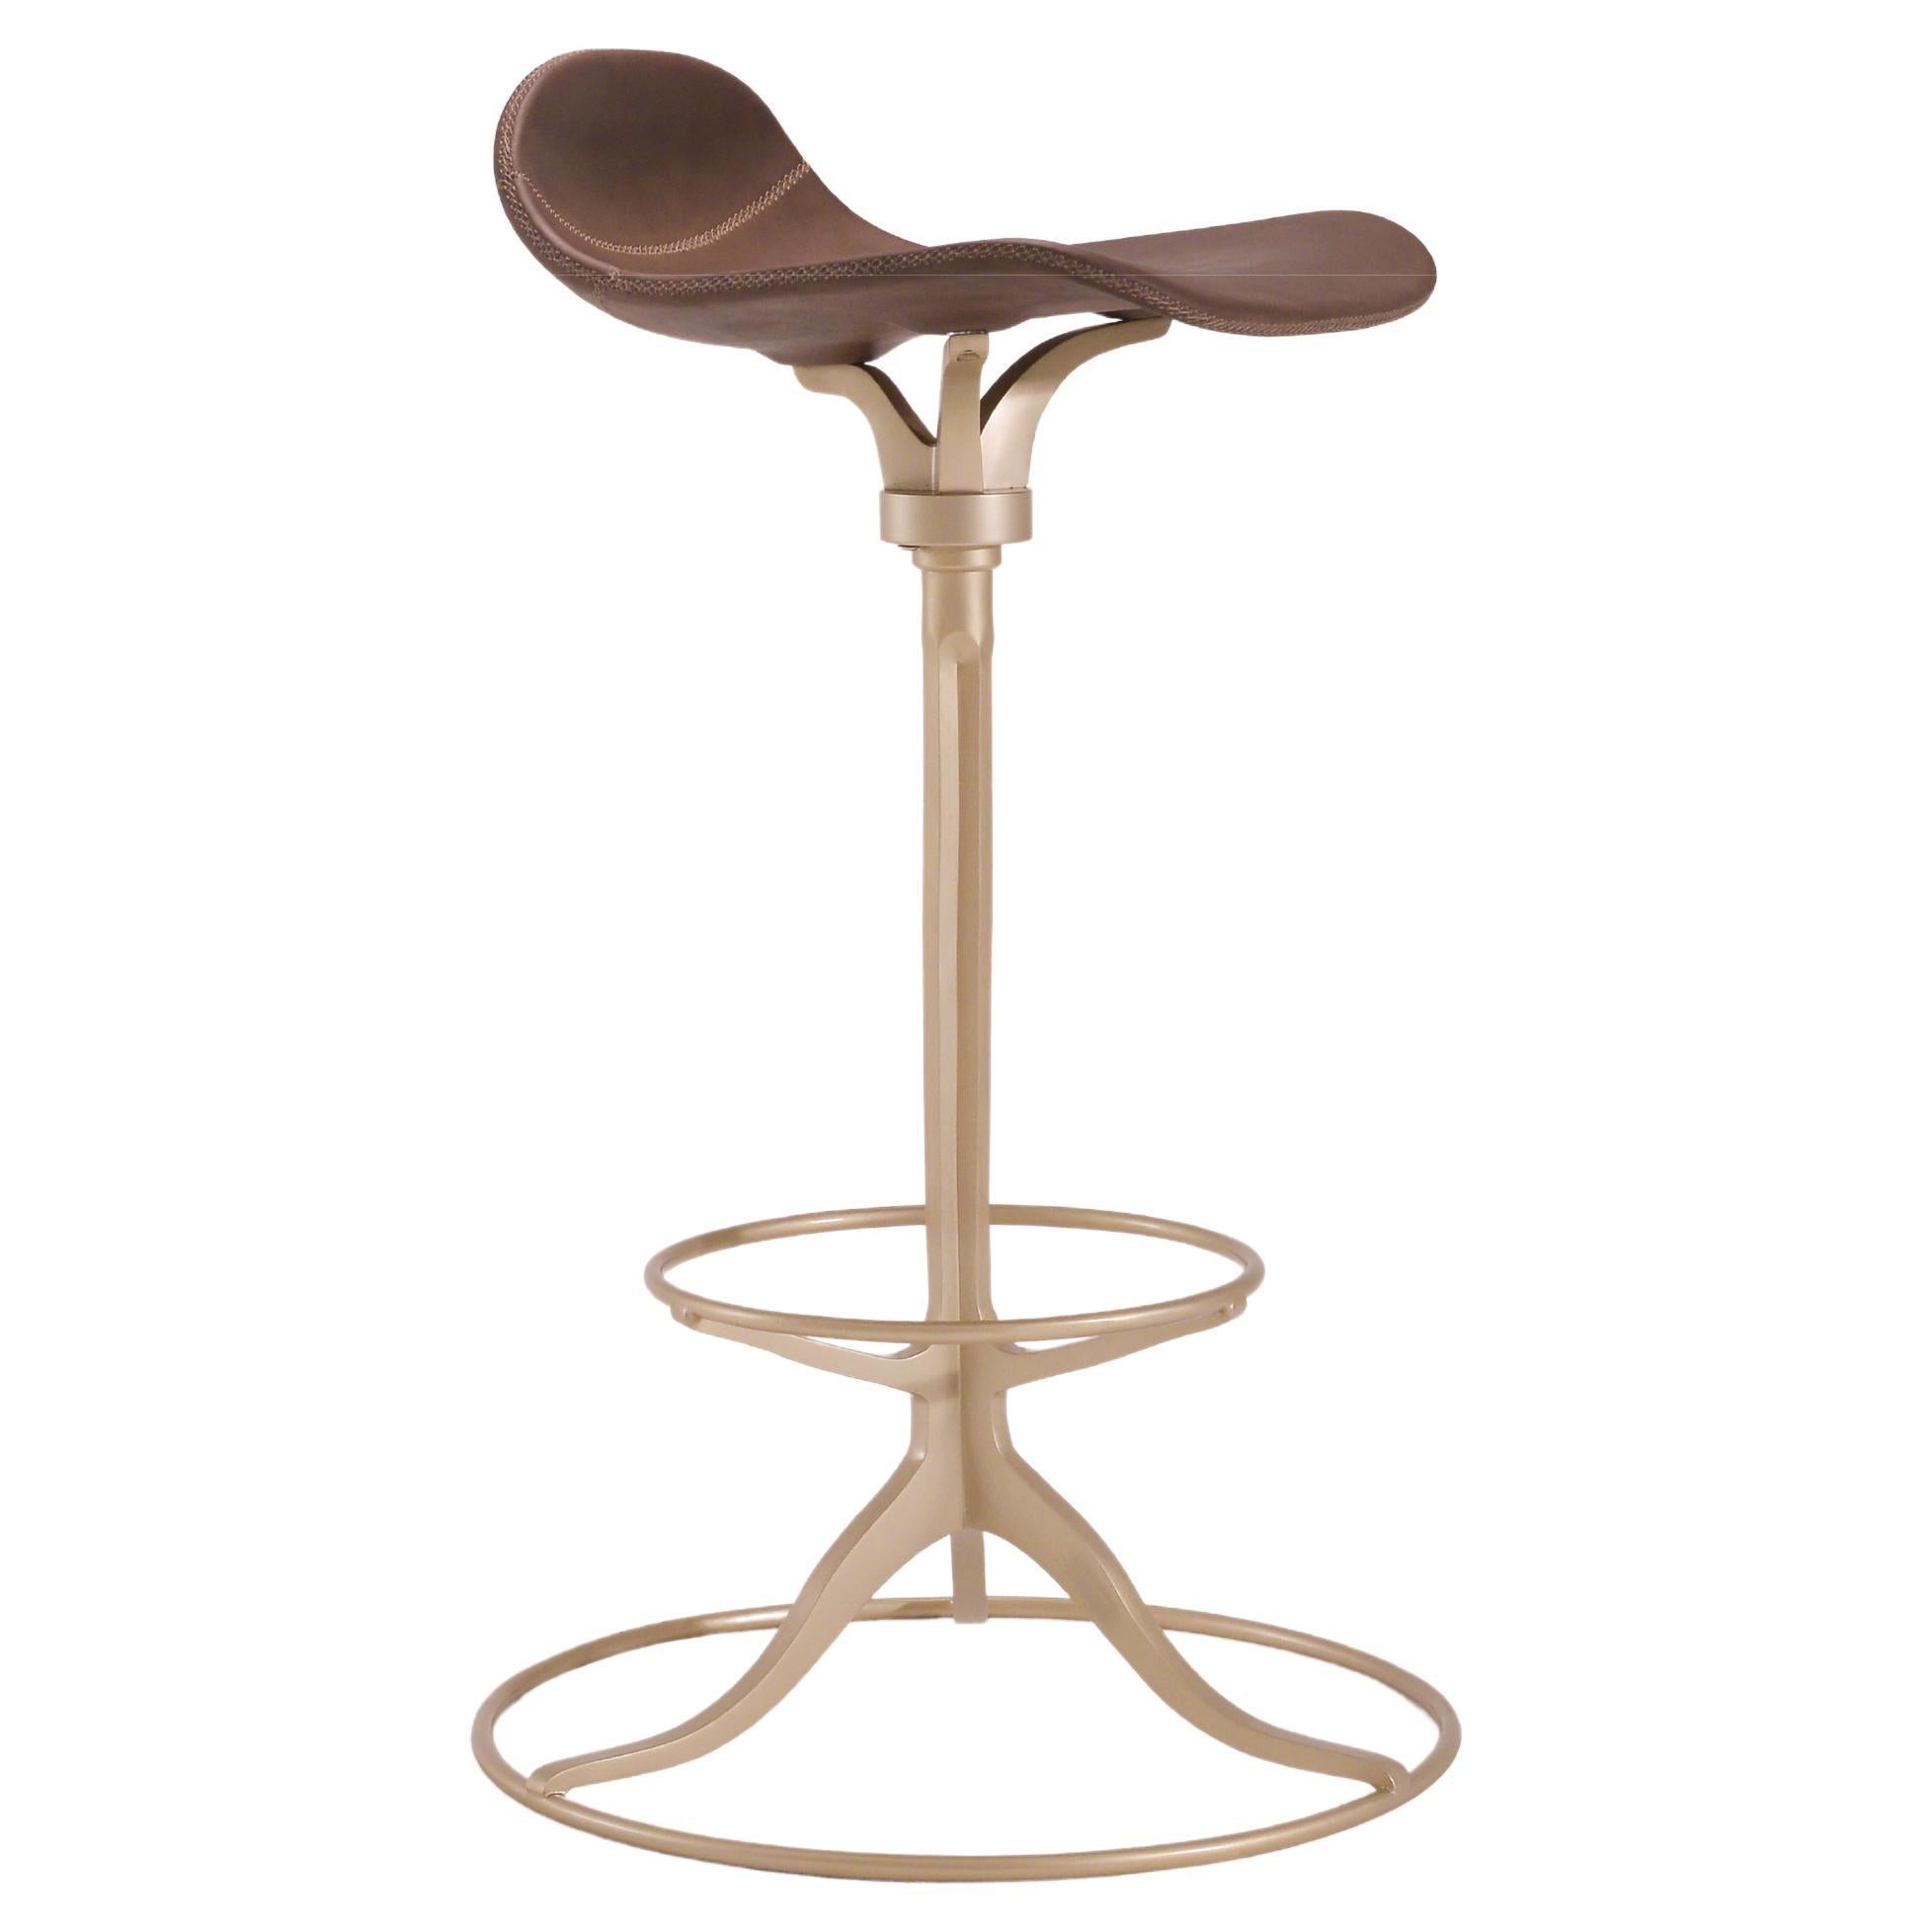 Bar height stools + Swivel + Two Rings in Marron Glacé (LB) 

Model: PT452_BS1_LB
Seat: Leather
Seat color: Marron Glacé (Light brown)
Base: Sand cast brass base (Leather Wrapped Bottom Ring)
Base finish: Golden sand
Dimensions: 55 x 55 x 95 cm